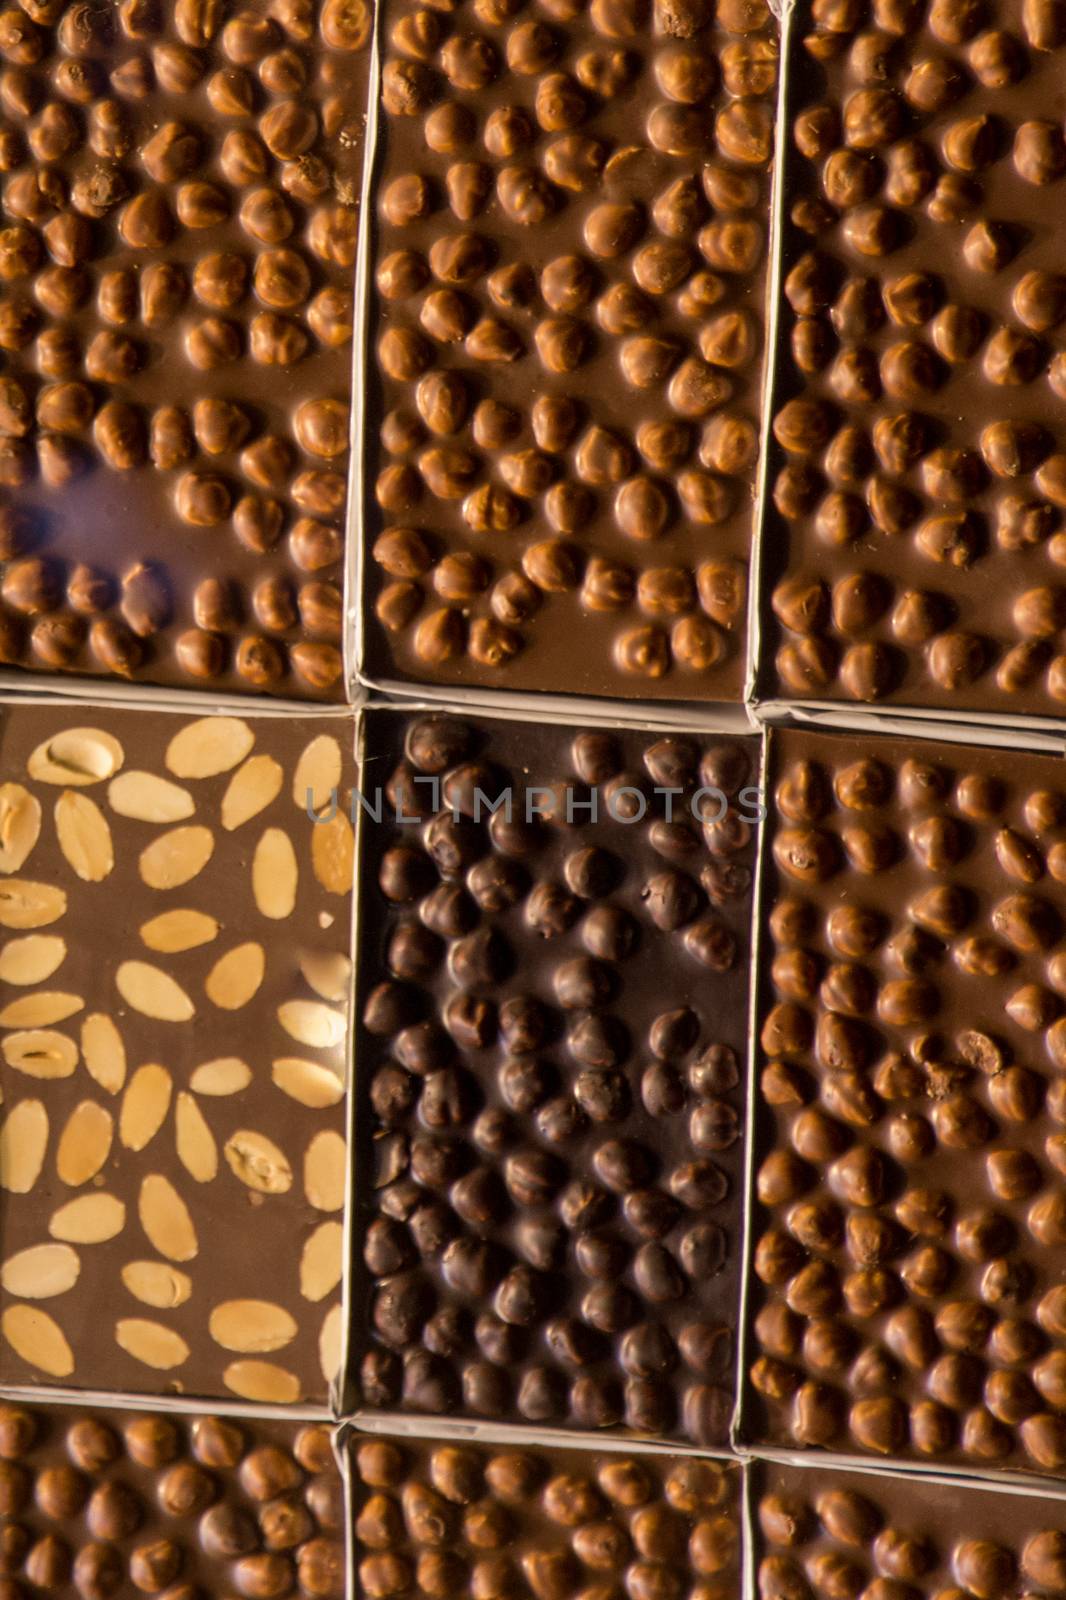 Home made chocolate bars as background by berkay